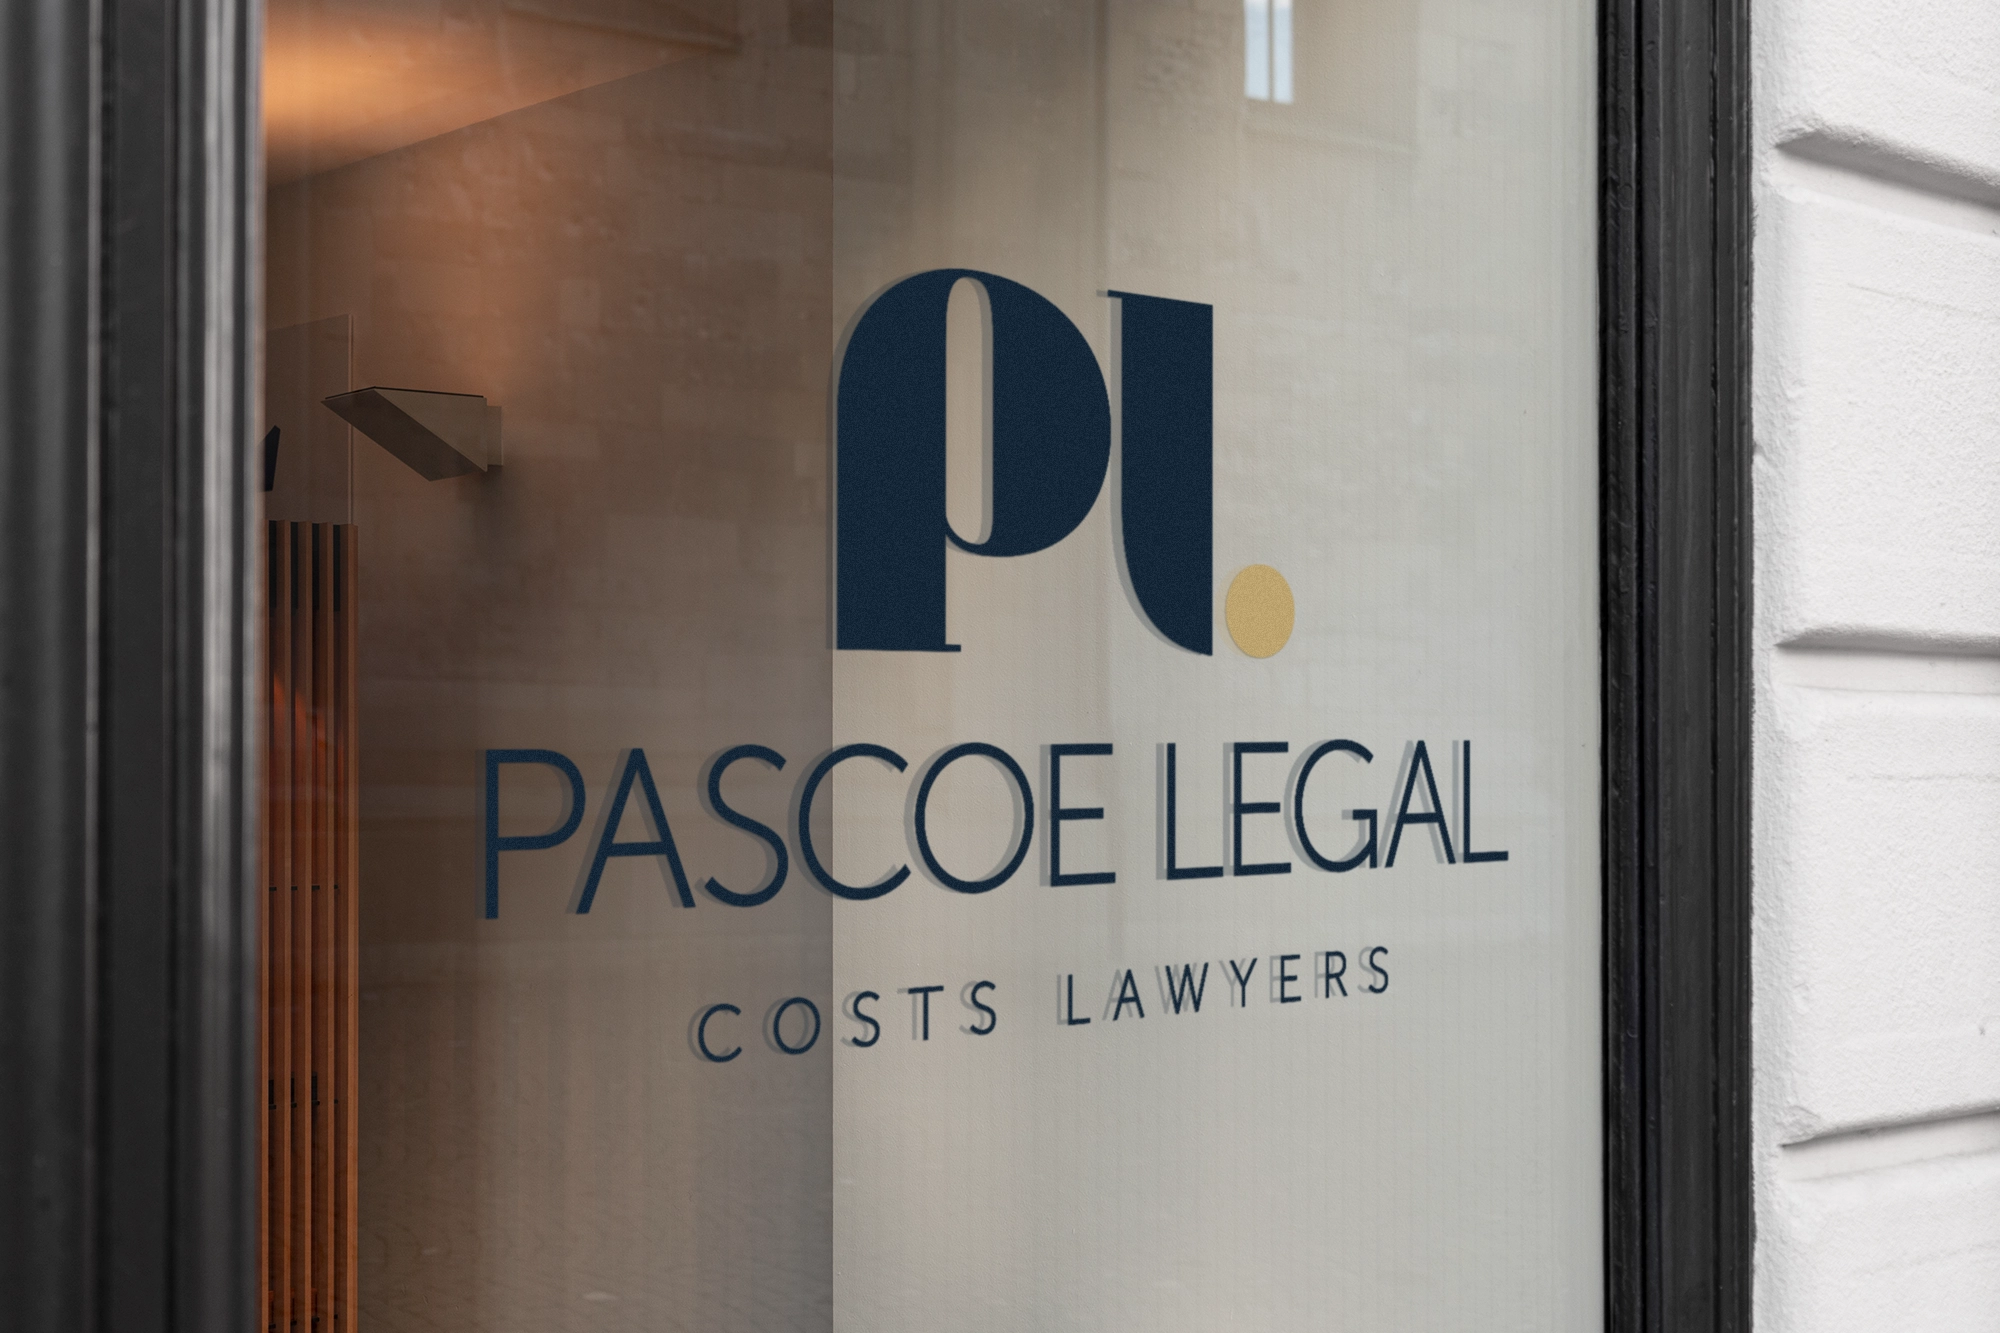 Pascoe Legal window sign